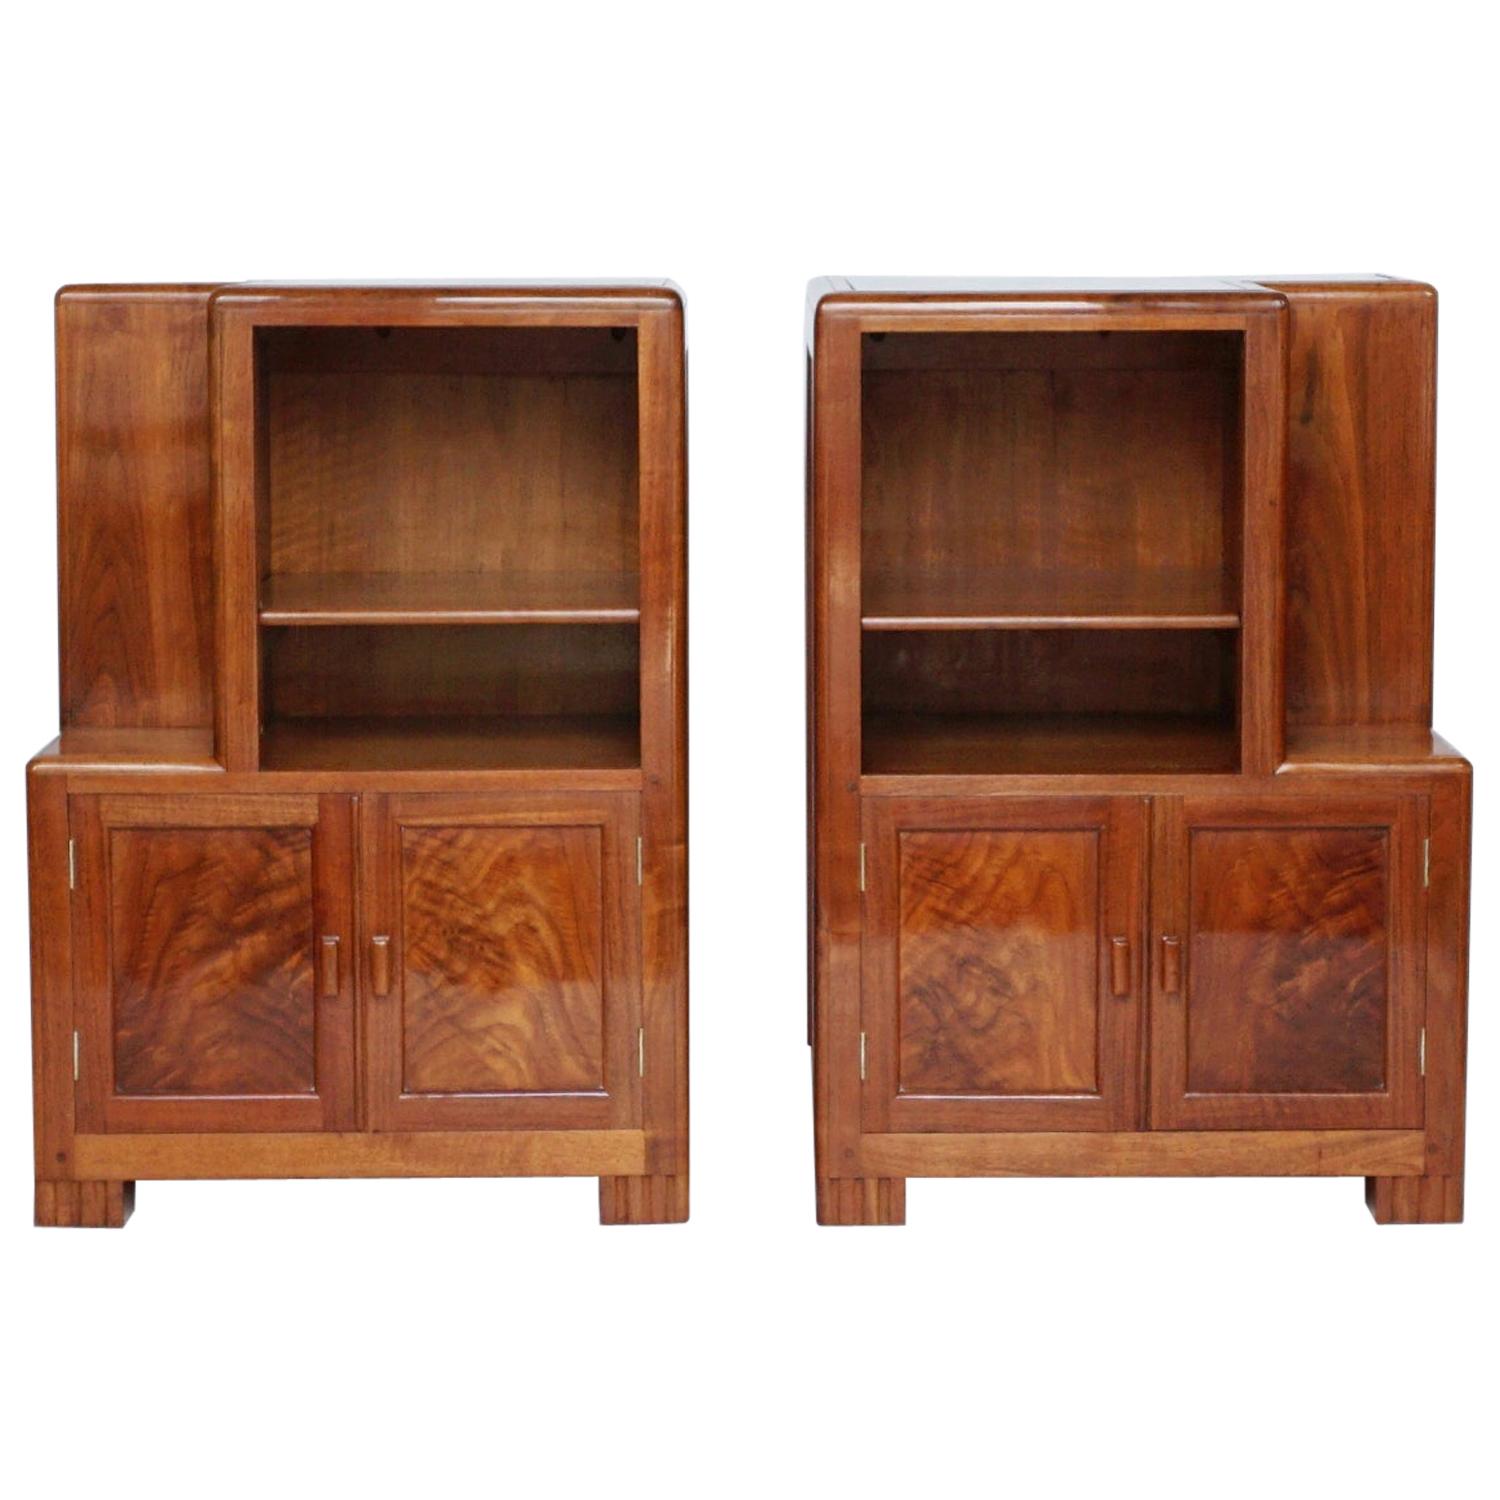 Pair of Art Deco Bedside Cabinets by Betty Joel